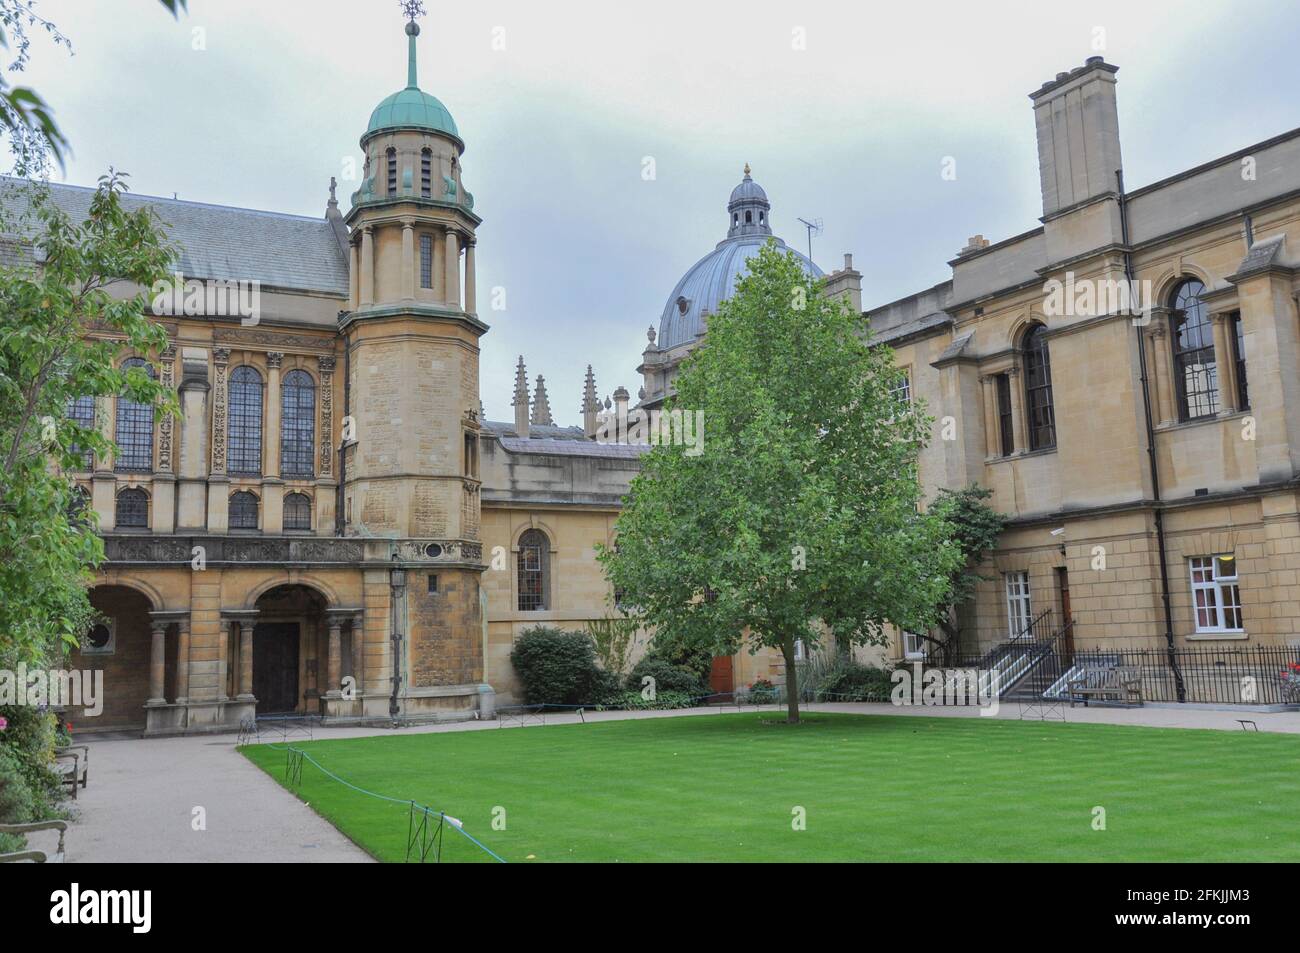 View of T. G. Jackson chapel from Hertford College Old Quad, Oxford, United Kingdom. Overcast Sky. Stock Photo